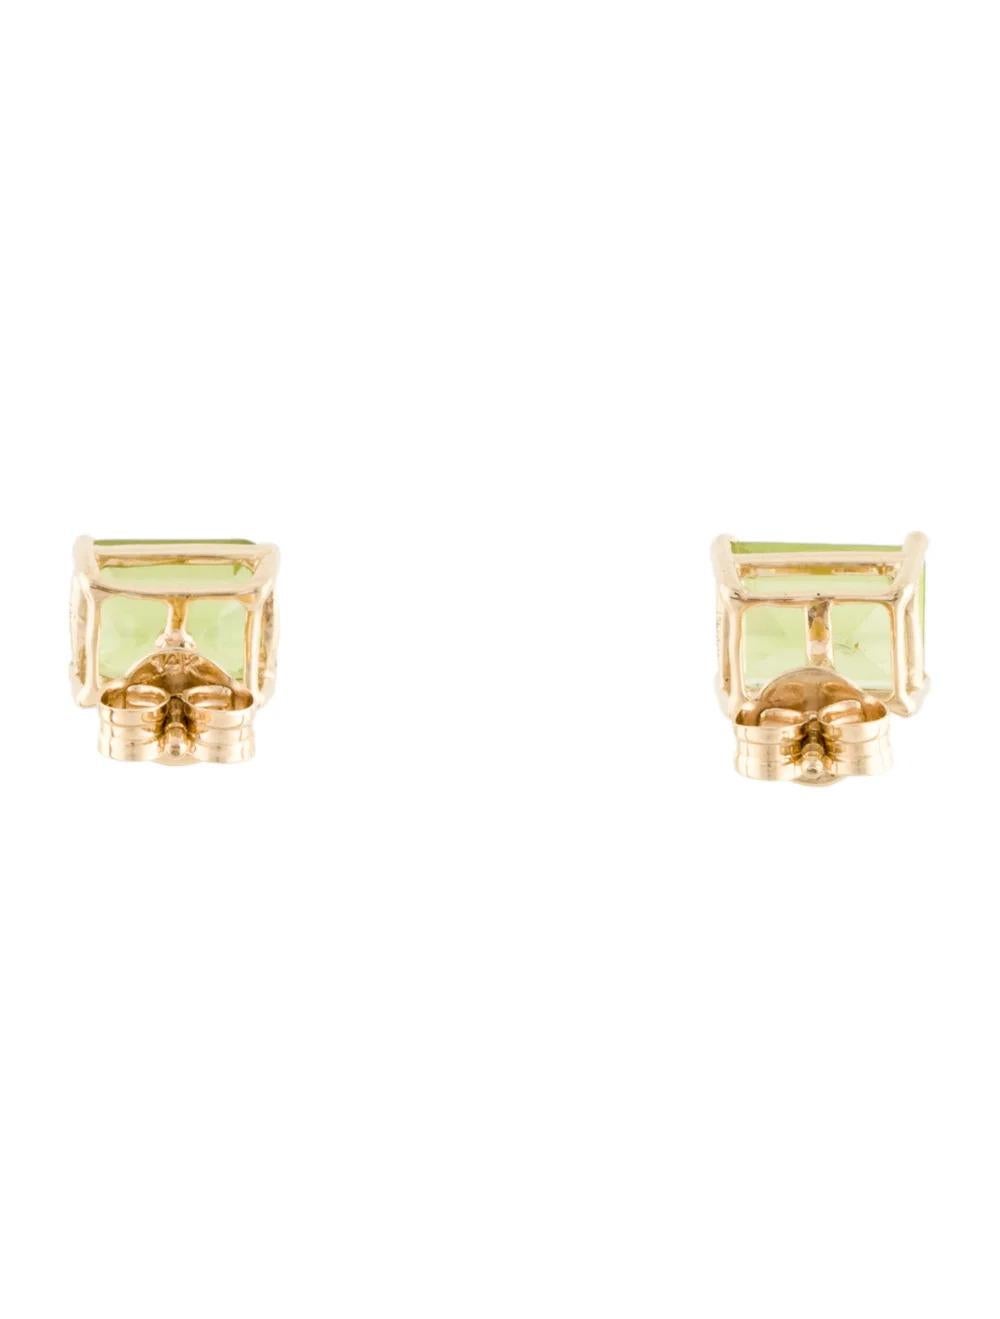 14K Peridot Stud Earrings, 3.74ctw - Green Gemstone, Luxury Statement Jewelry In New Condition For Sale In Holtsville, NY